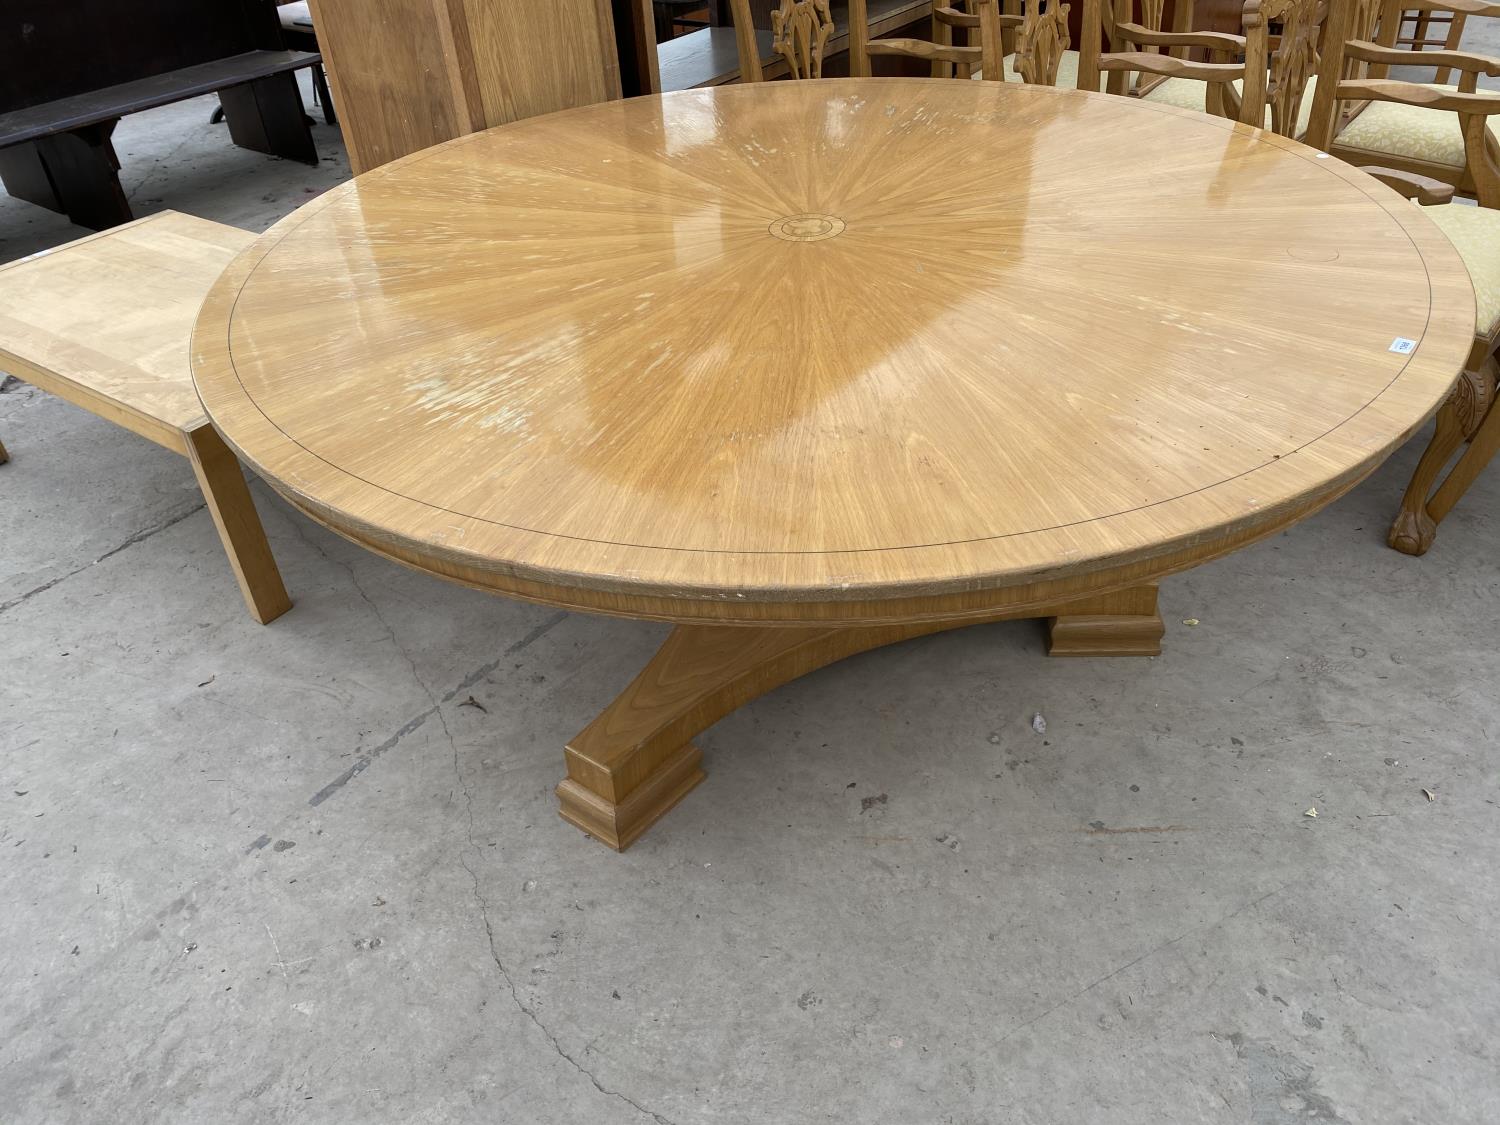 A LARGE HEAVY CIRCULAR OAK DINING TABLE - Image 2 of 9